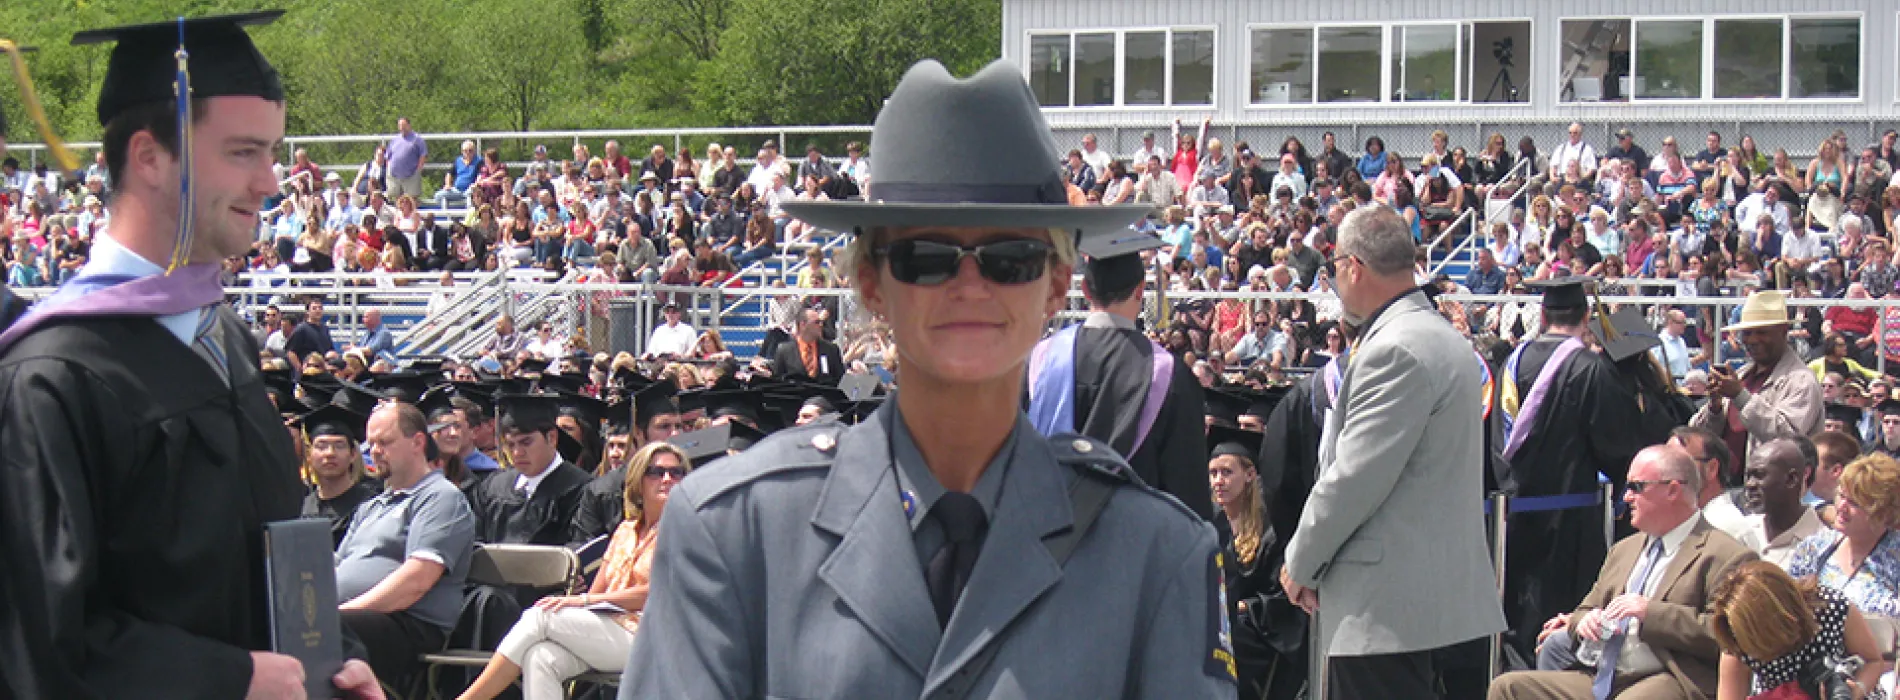 officer outside at Commencement 